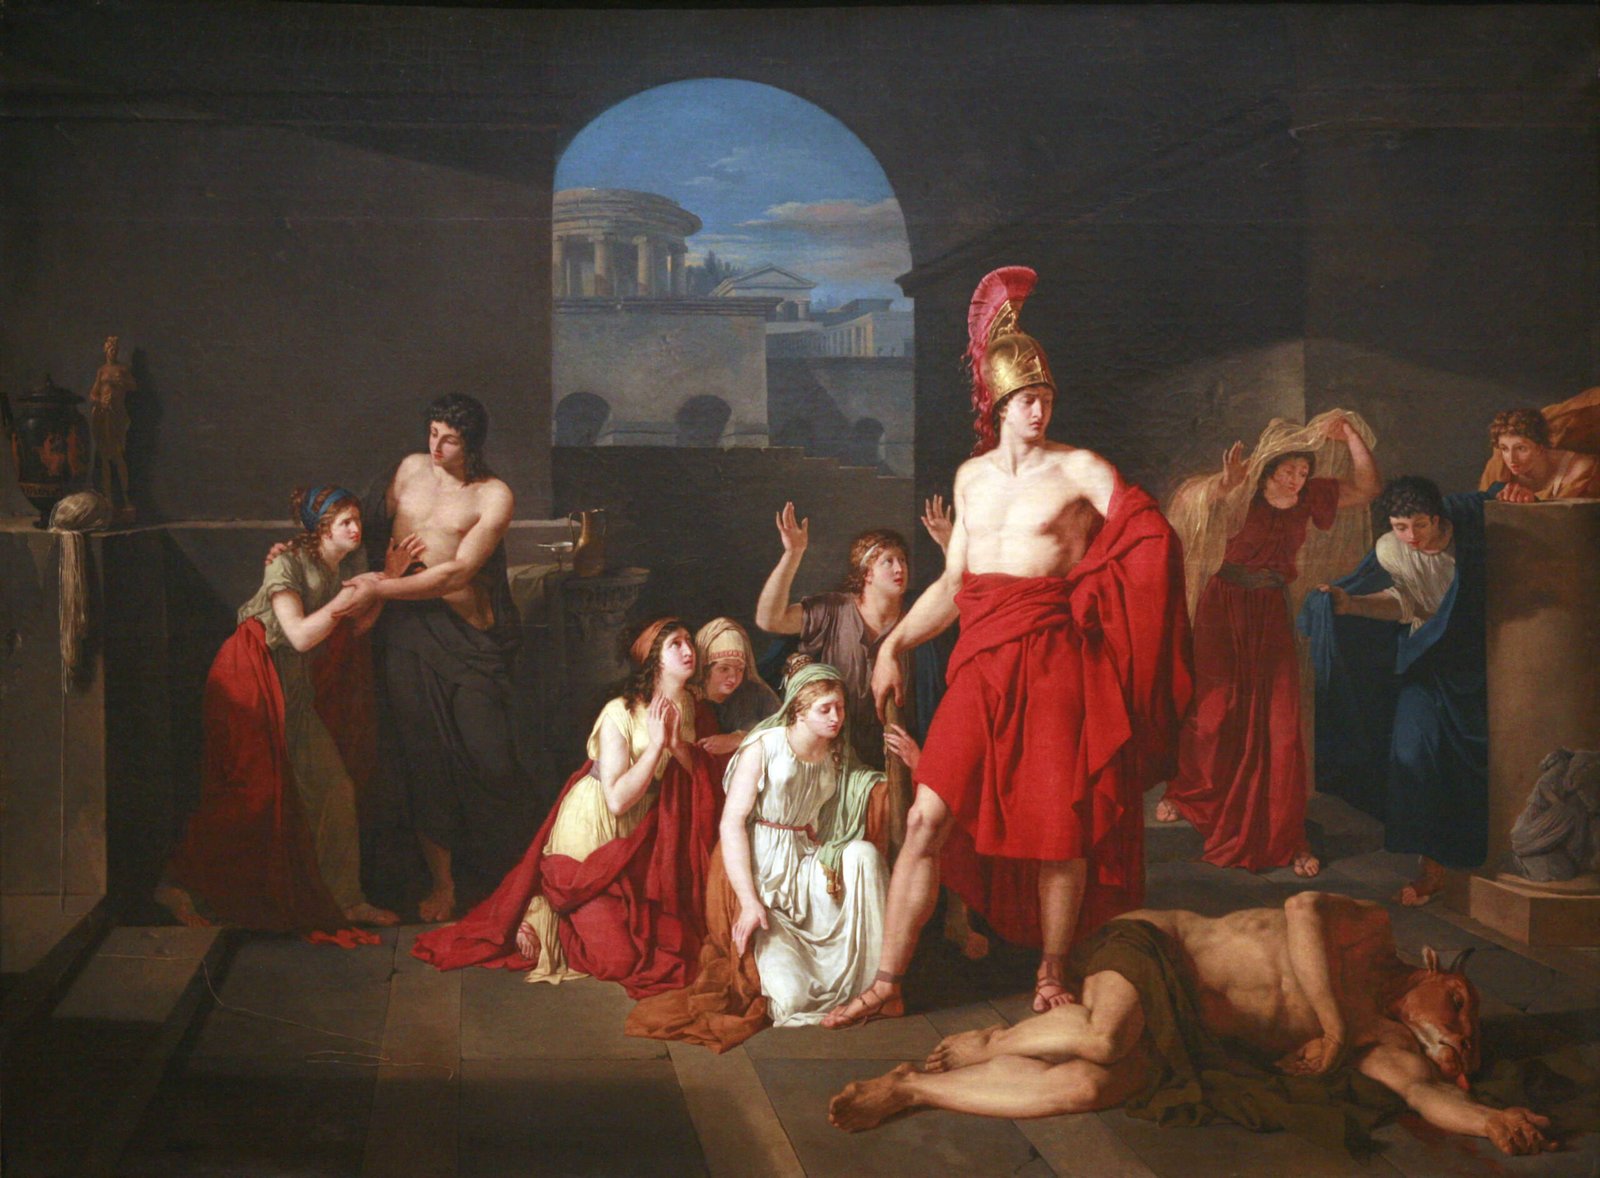 This painting represents Theseus dressed in scarlet robes, surrounded by women. after having killed the Minotaur.